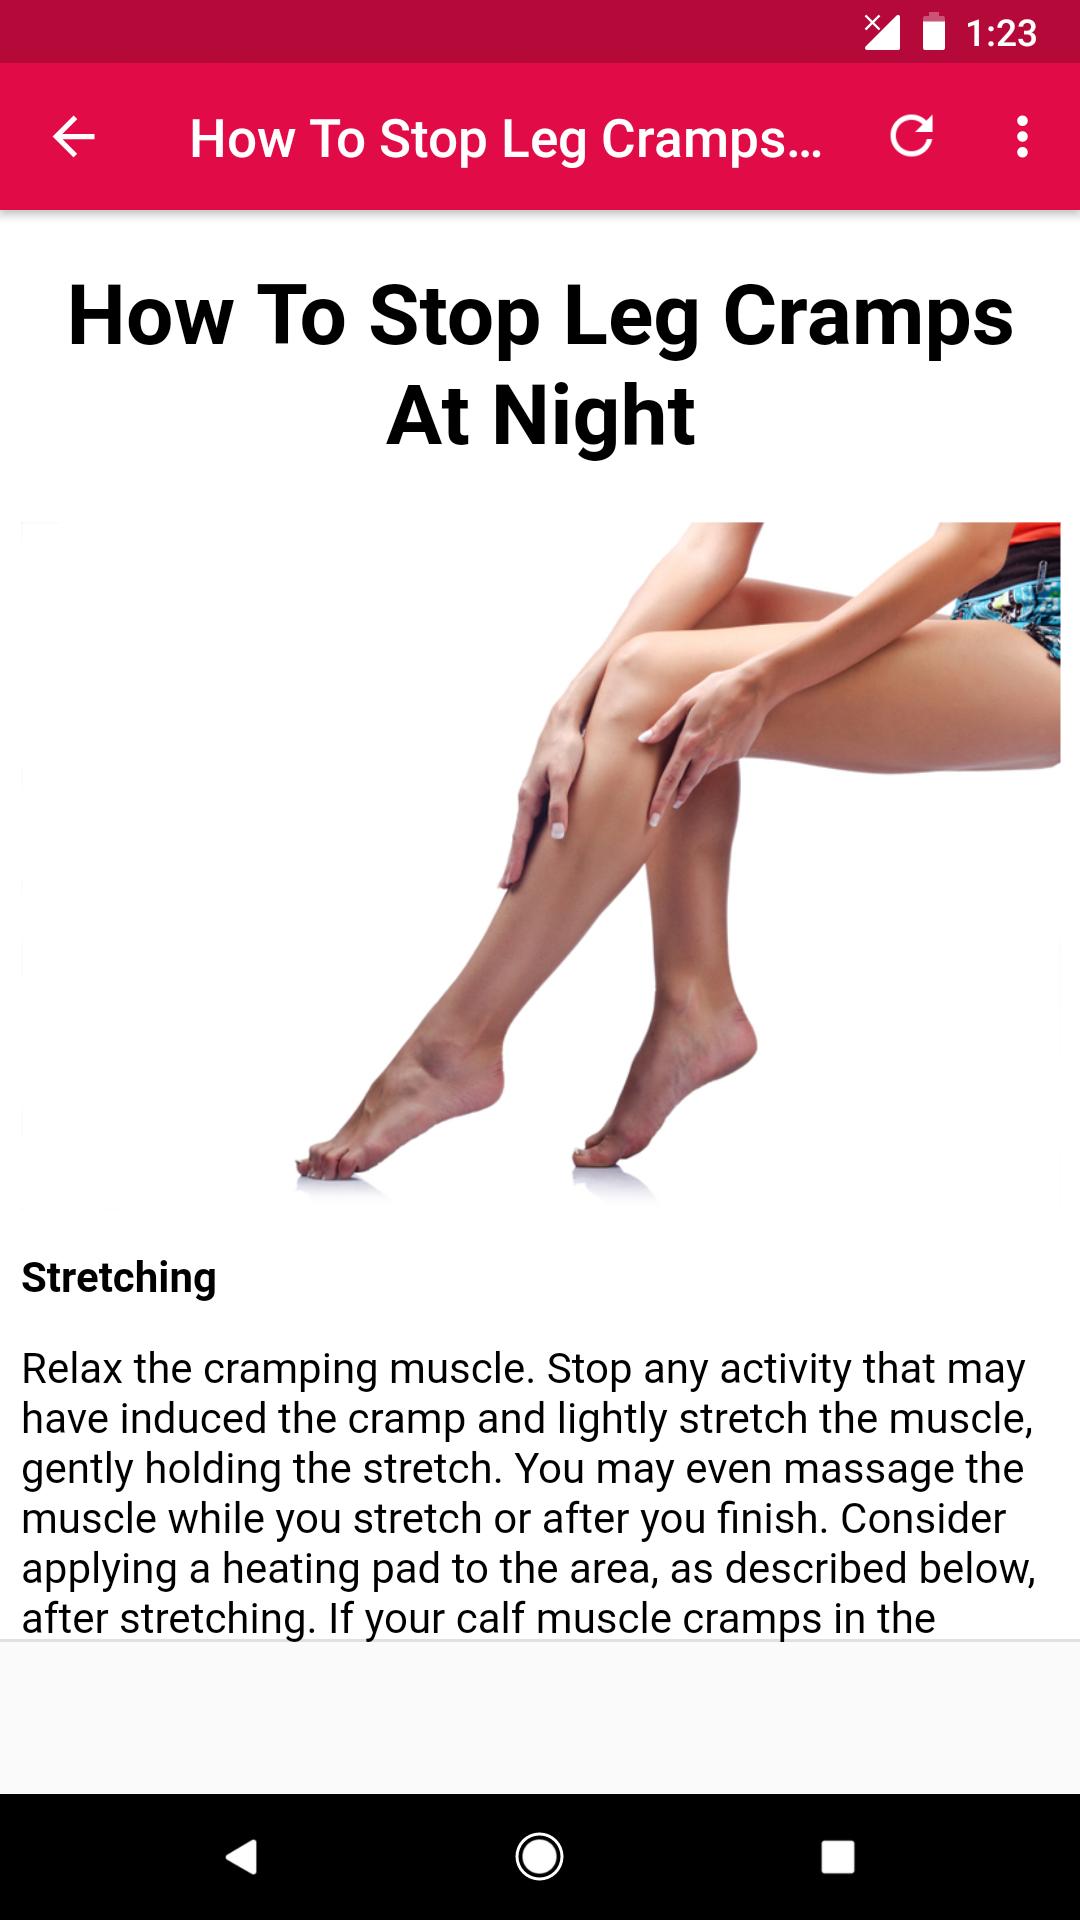 Android 用の How To Stop Leg Cramps APK をダウンロード